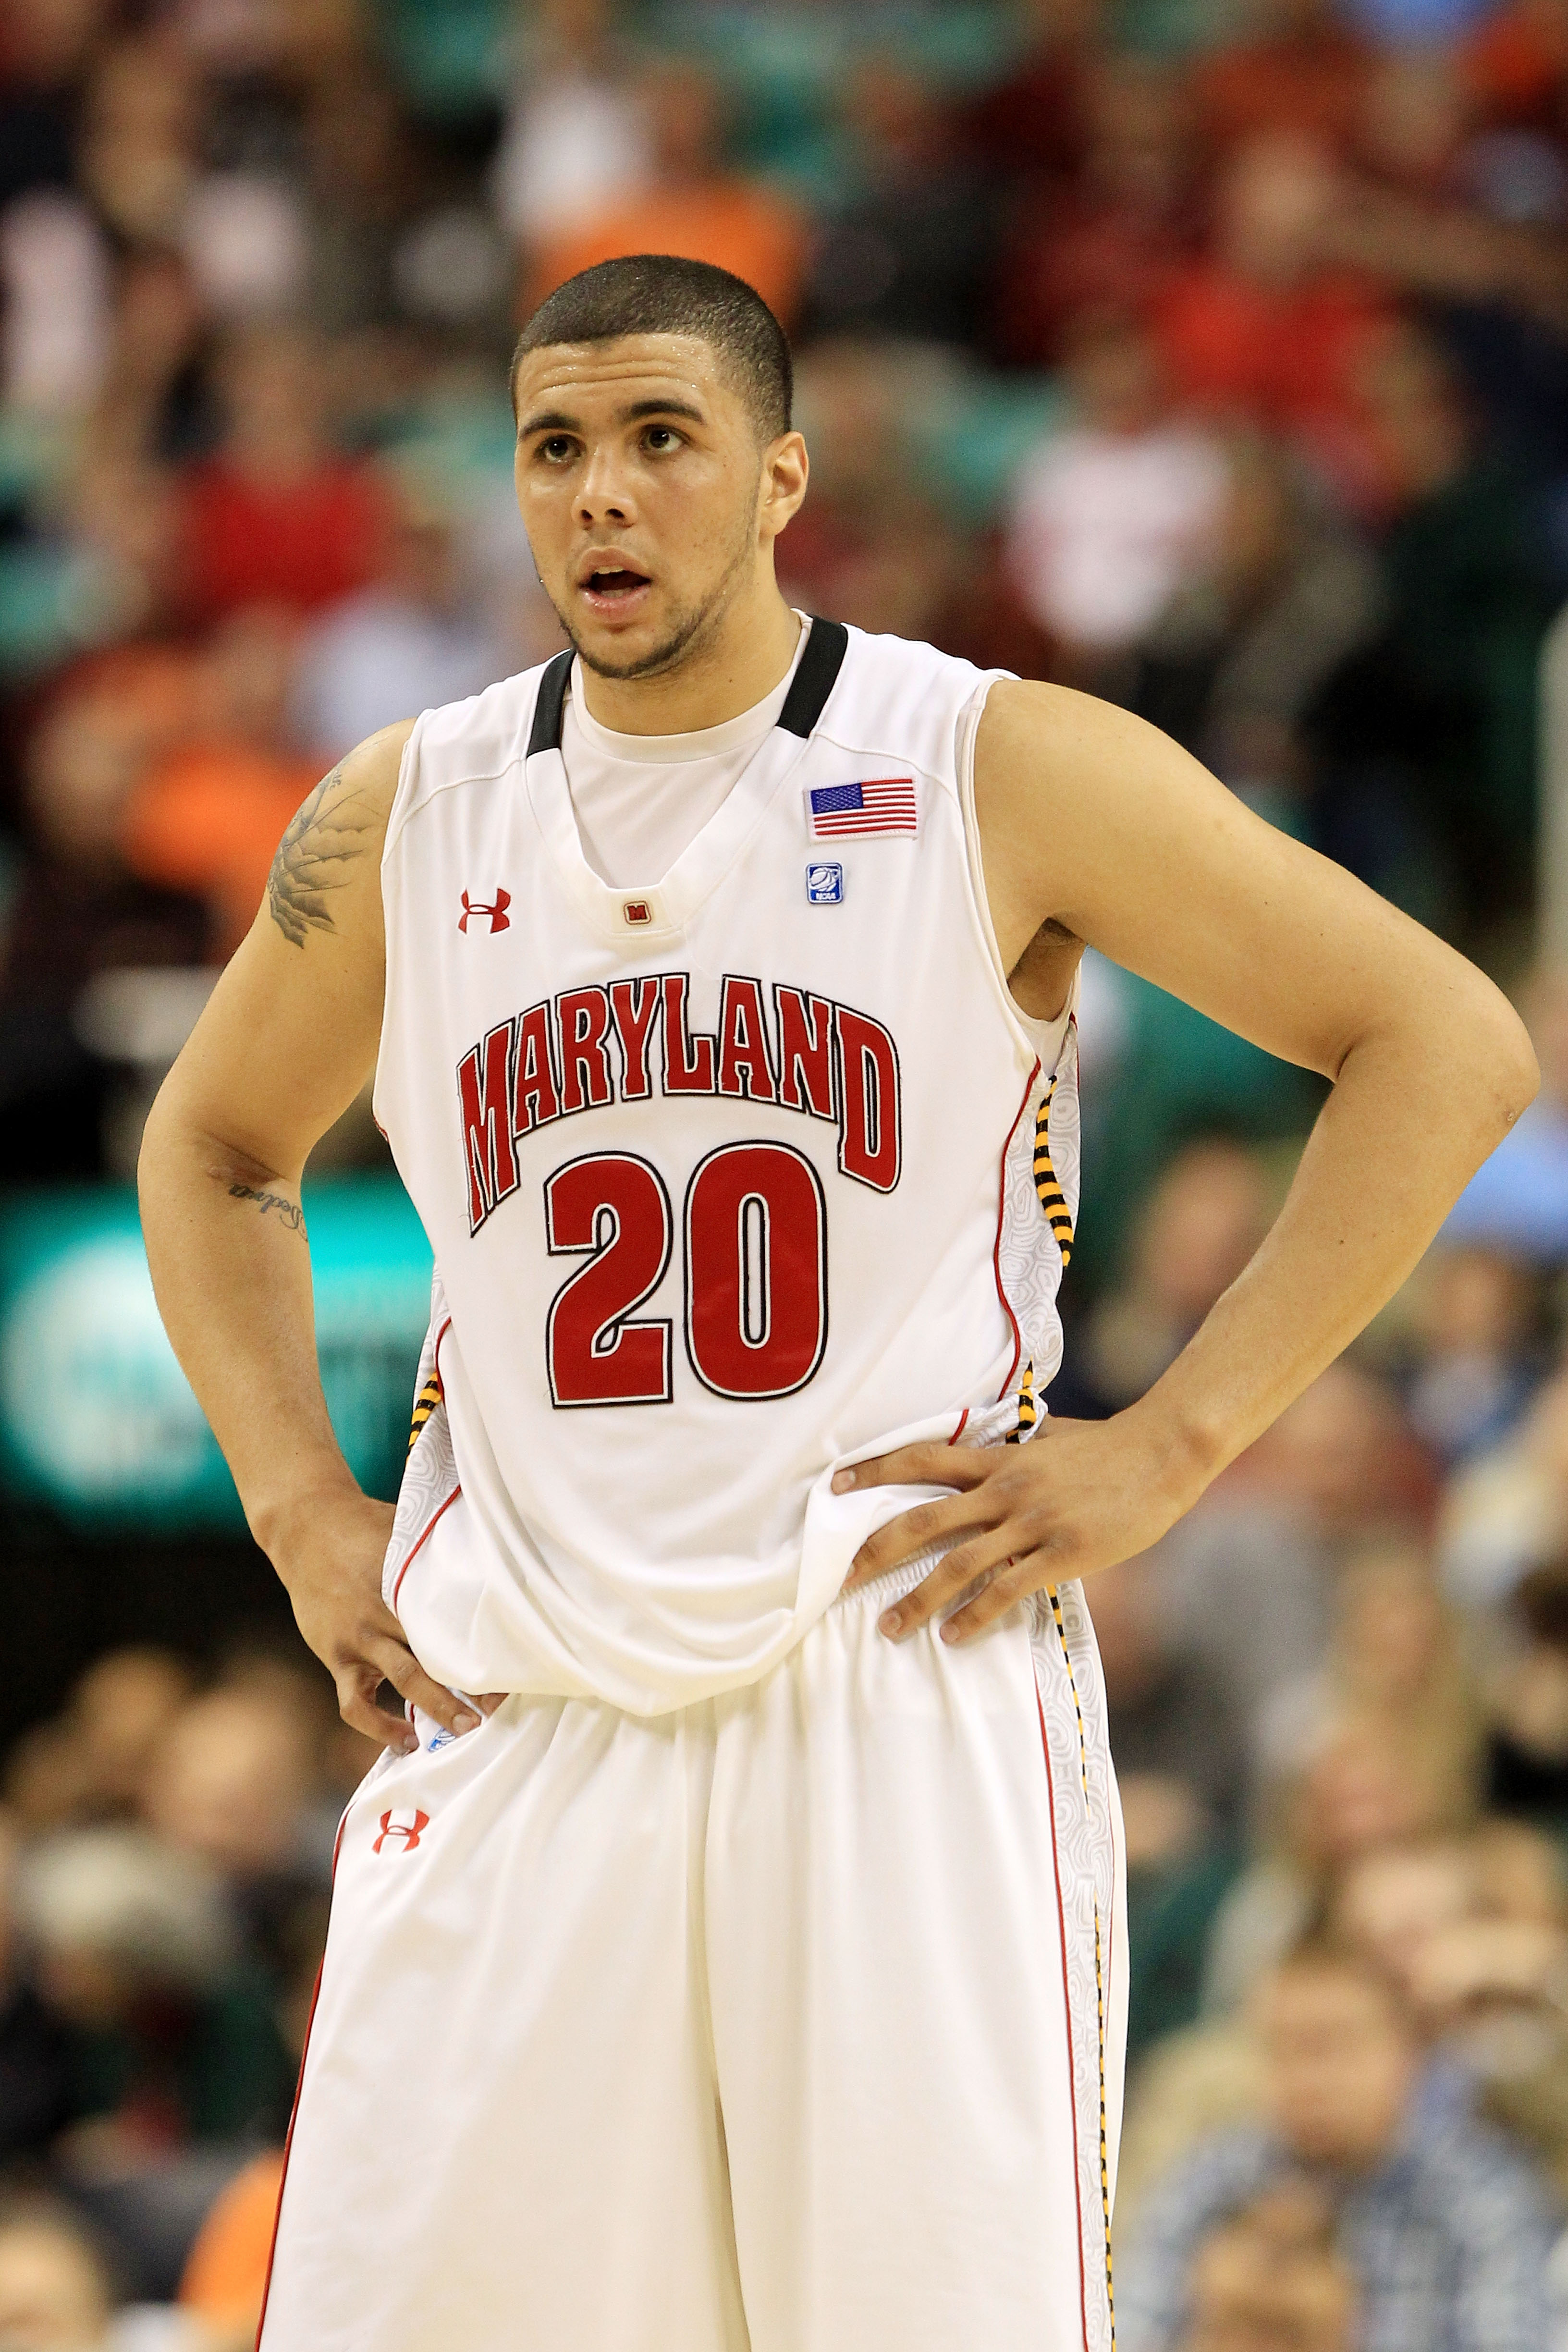 GREENSBORO, NC - MARCH 10:  Jordan Williams #20 of the Maryland Terrapins looks on while playing against the North Carolina State Wolfpack during the first round of the 2011 ACC men's basketball tournament at the Greensboro Coliseum on March 10, 2011 in G